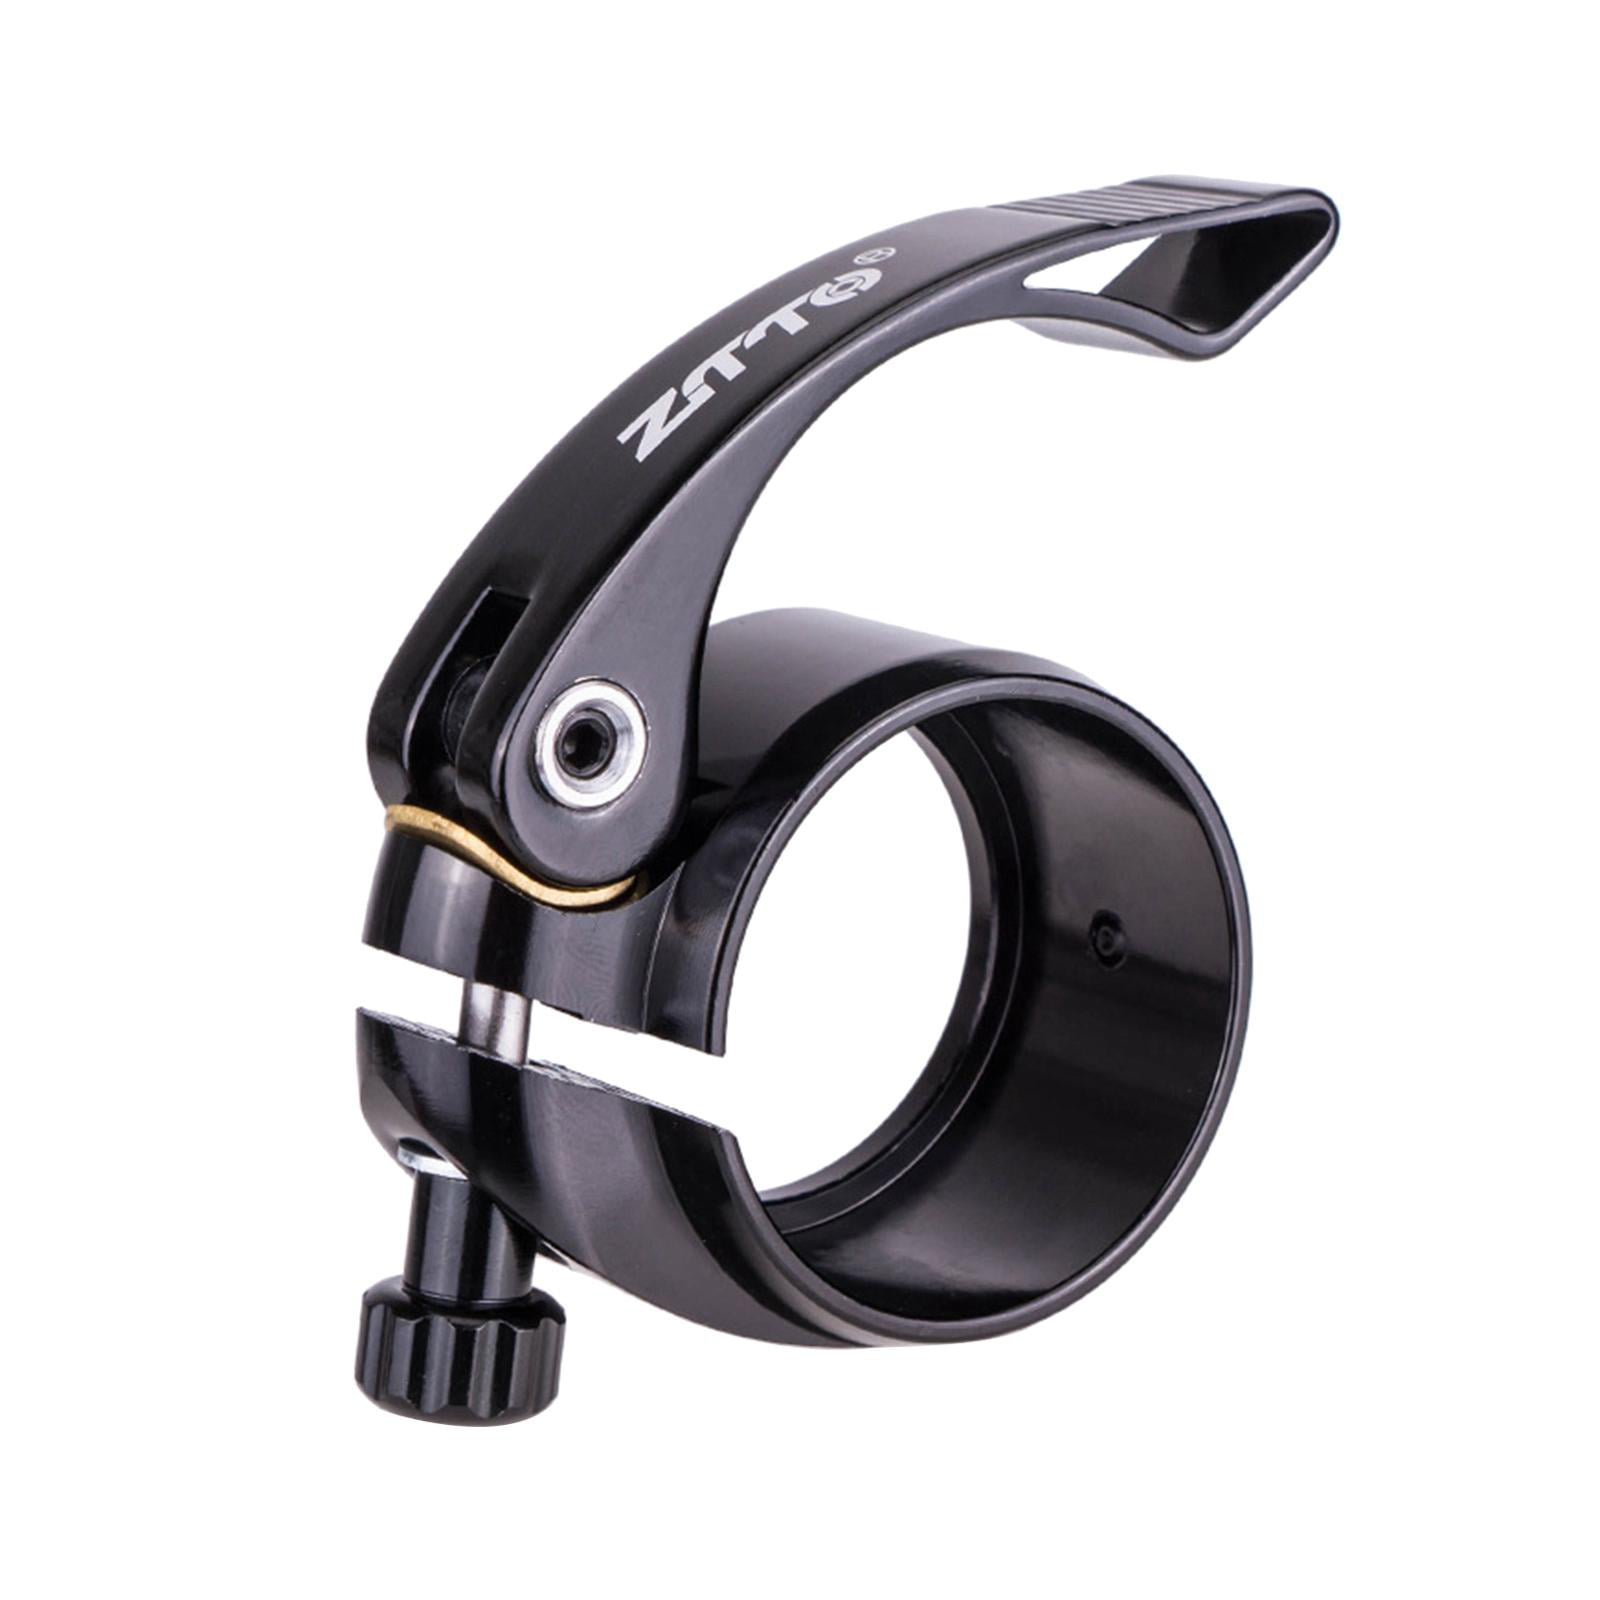 Heavy Duty Black, 40mm Cycle Torch Quick Release Bicycle Seat Post Clamp Sturdy & Polished Design Finest Machined Quality Lightweight Bike Seat Clamp 